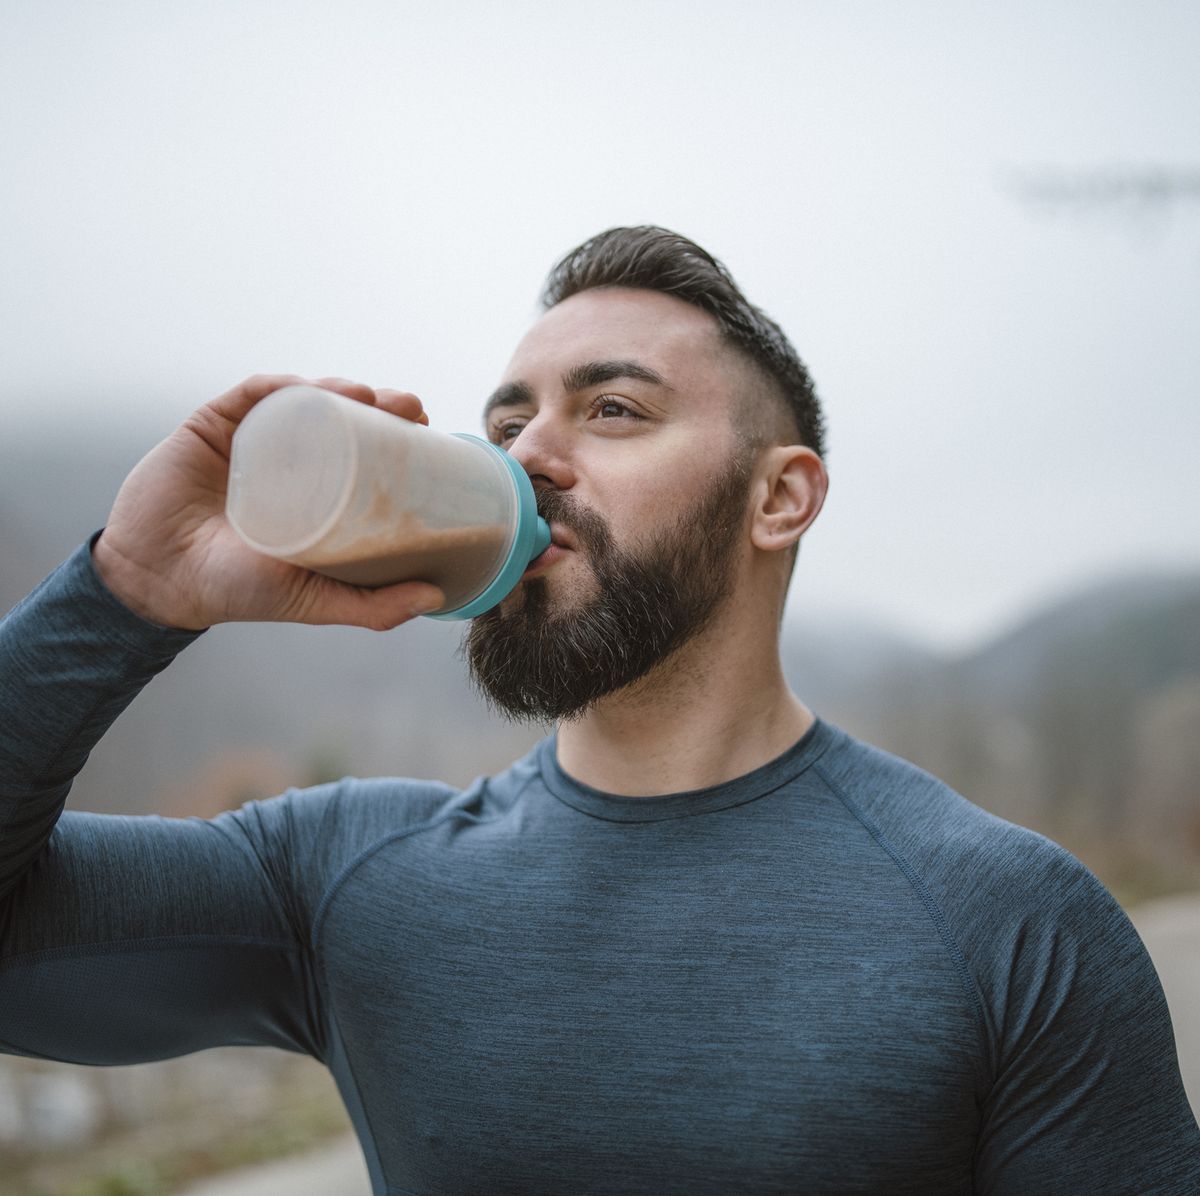 Nutrition Drinks and Shakes for Adults